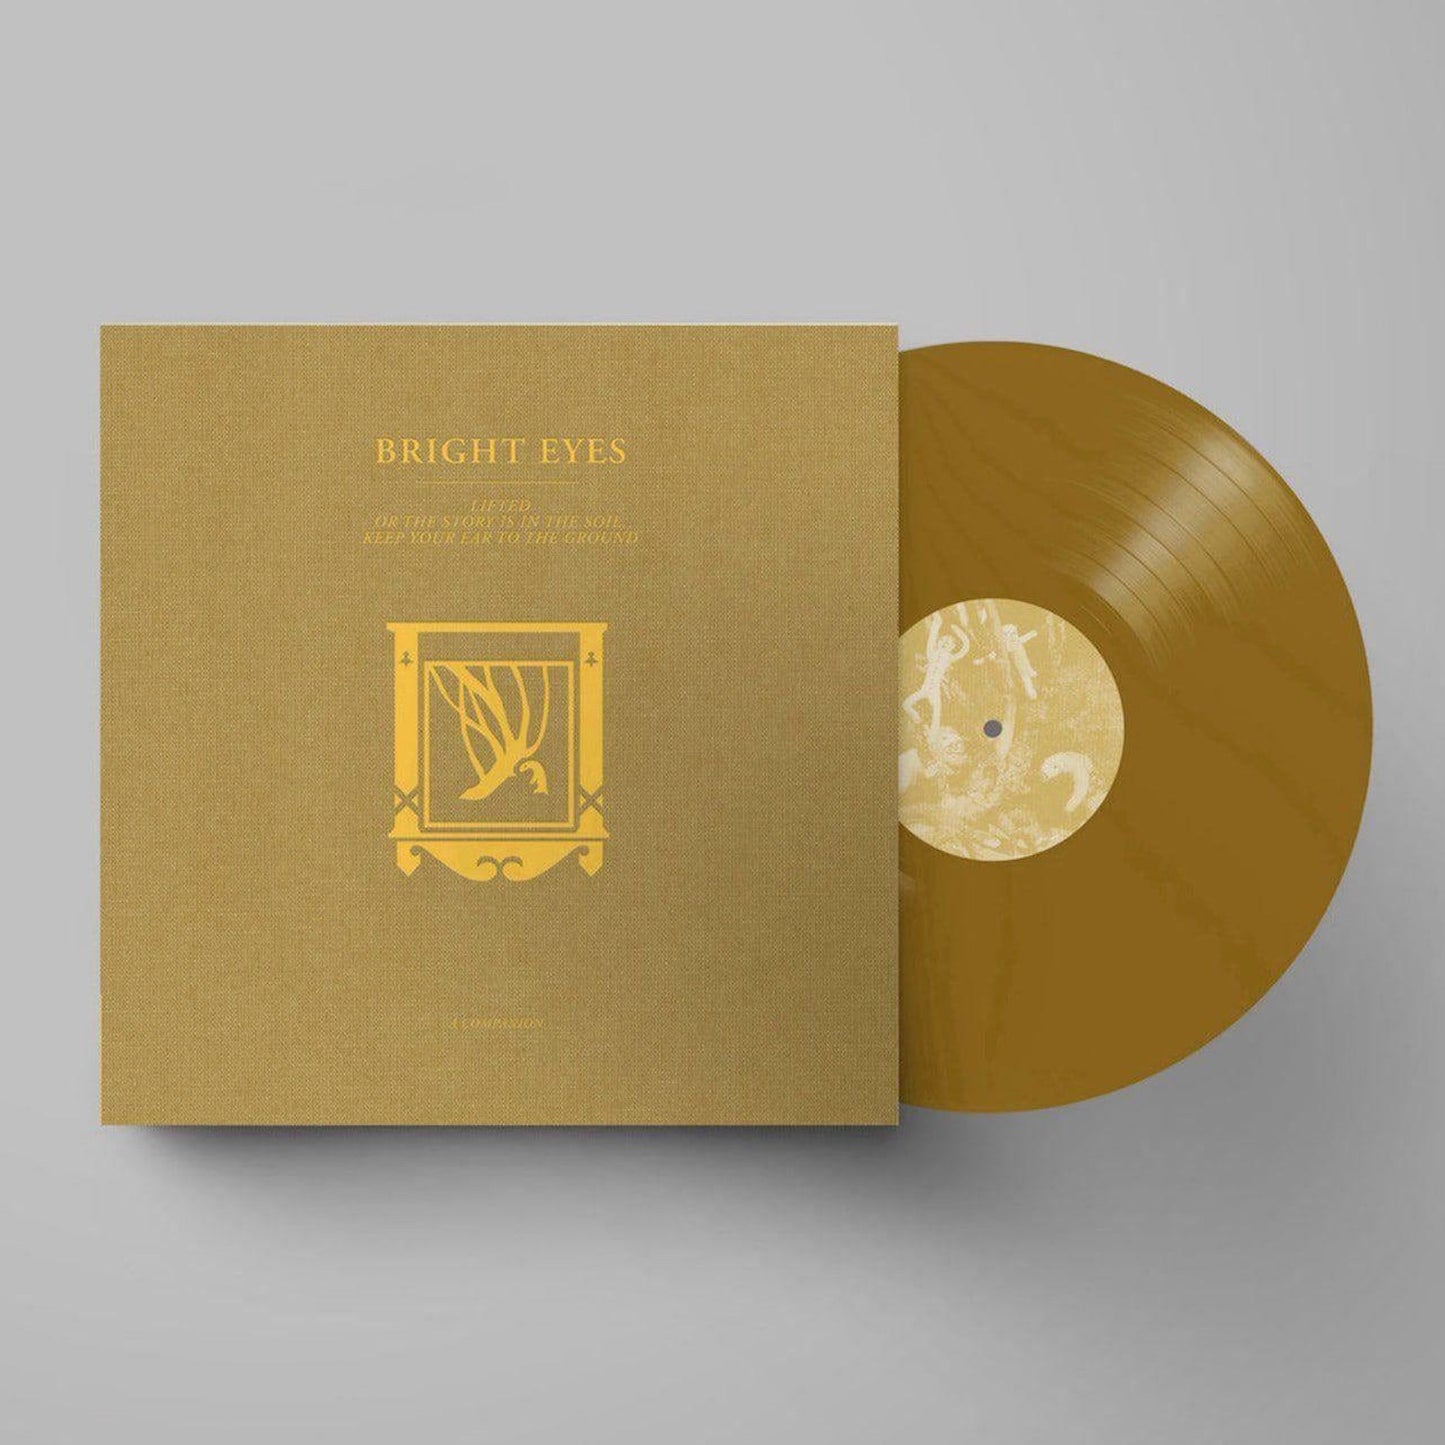 Bright Eyes - LIFTED Or The Story Is In The Soil, Keep Your Ear To The Ground[A Companion]. LP [Ltd. Ed. Gold Vinyl]